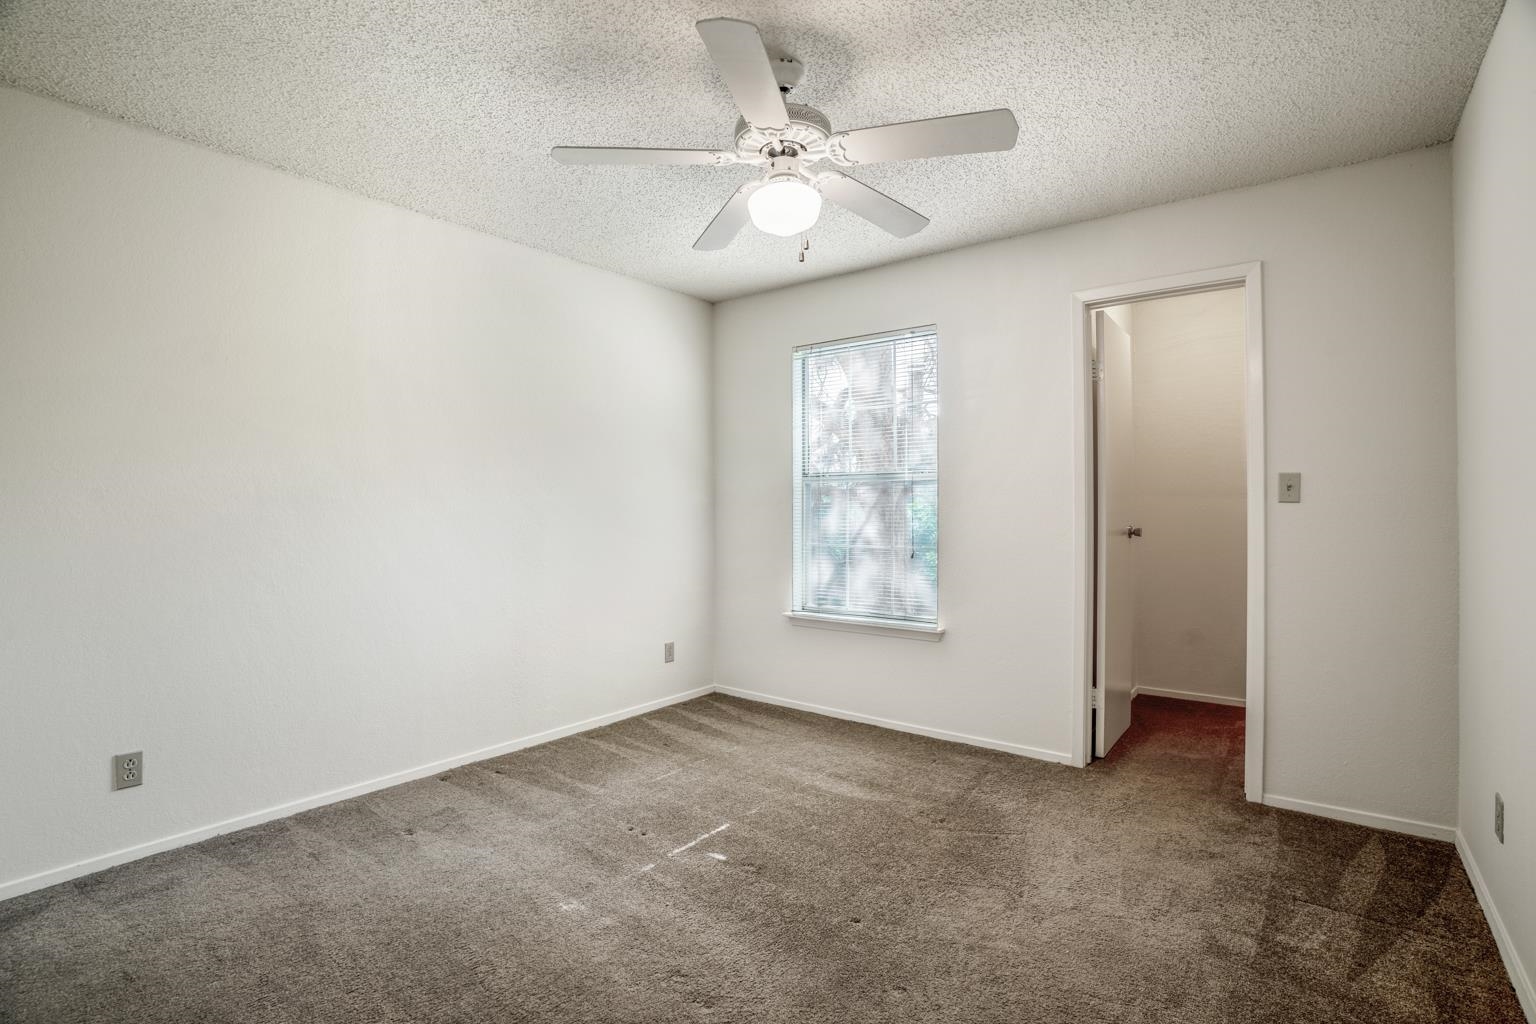 2501 W Zia Rd UNIT 10-208, Santa Fe, New Mexico 87505, 1 Bedroom Bedrooms, ,1 BathroomBathrooms,Residential,For Sale,2501 W Zia Rd UNIT 10-208,202202131